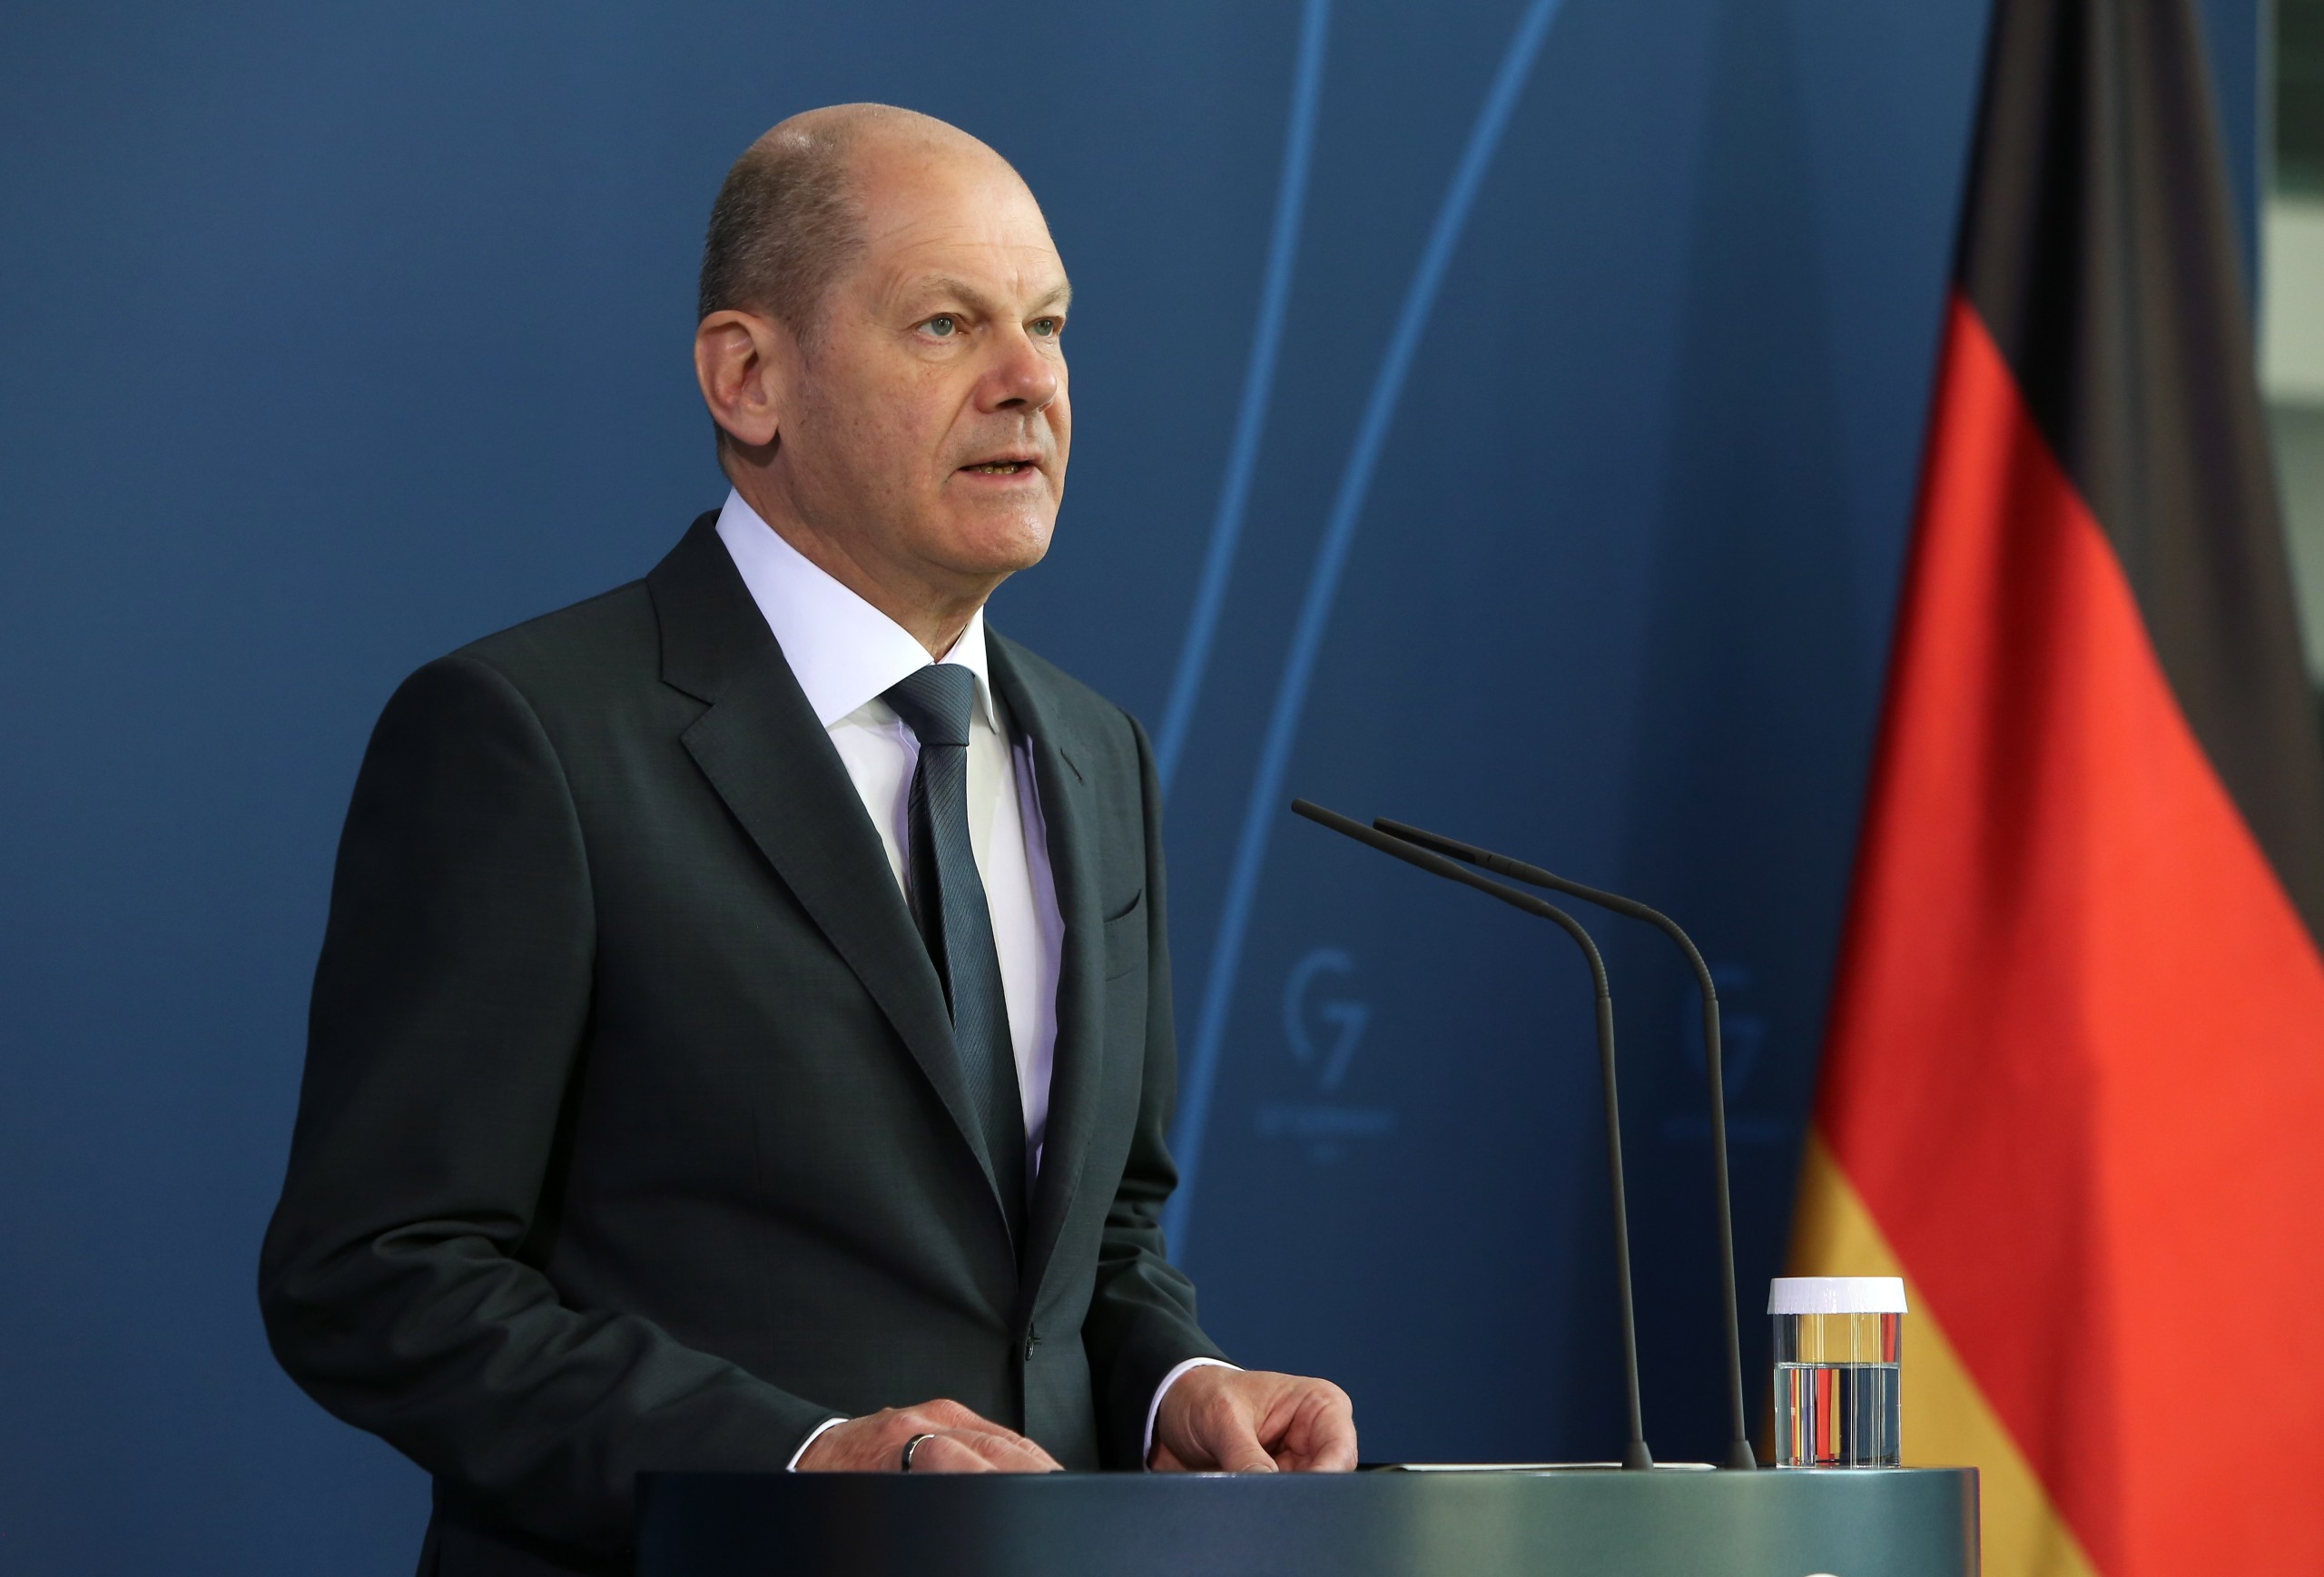 epa09868041 German Federal Chancellor Olaf Scholz speaks to the press in the federal Chancellery about an alleged massacre of Ukrainian civilians in the town of Bucha amidst the ongoing war in Ukraine, in Berlin, Germany, 03 April 2022. The incident near the Ukrainian capital of Kyiv, of which officials say evidence is mounting, was a 'deliberate massacre', said the country's foreign minister on 03 April.  EPA/ADAM BERRY / POOL